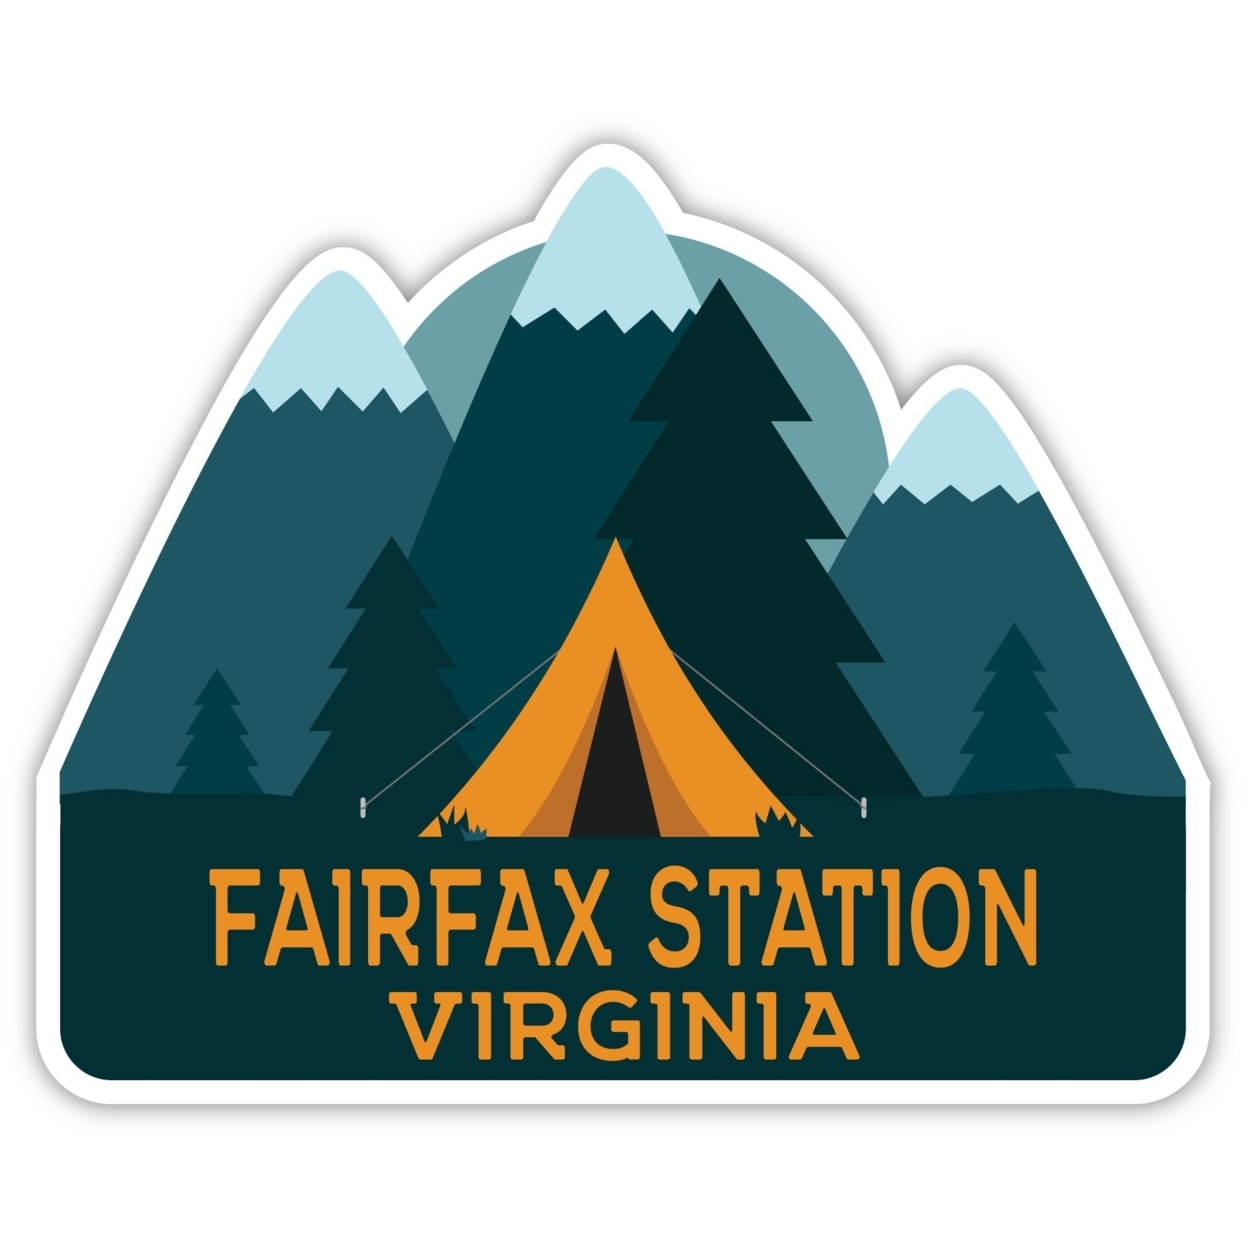 Fairfax Station Virginia Souvenir Decorative Stickers (Choose Theme And Size) - 4-Pack, 4-Inch, Tent